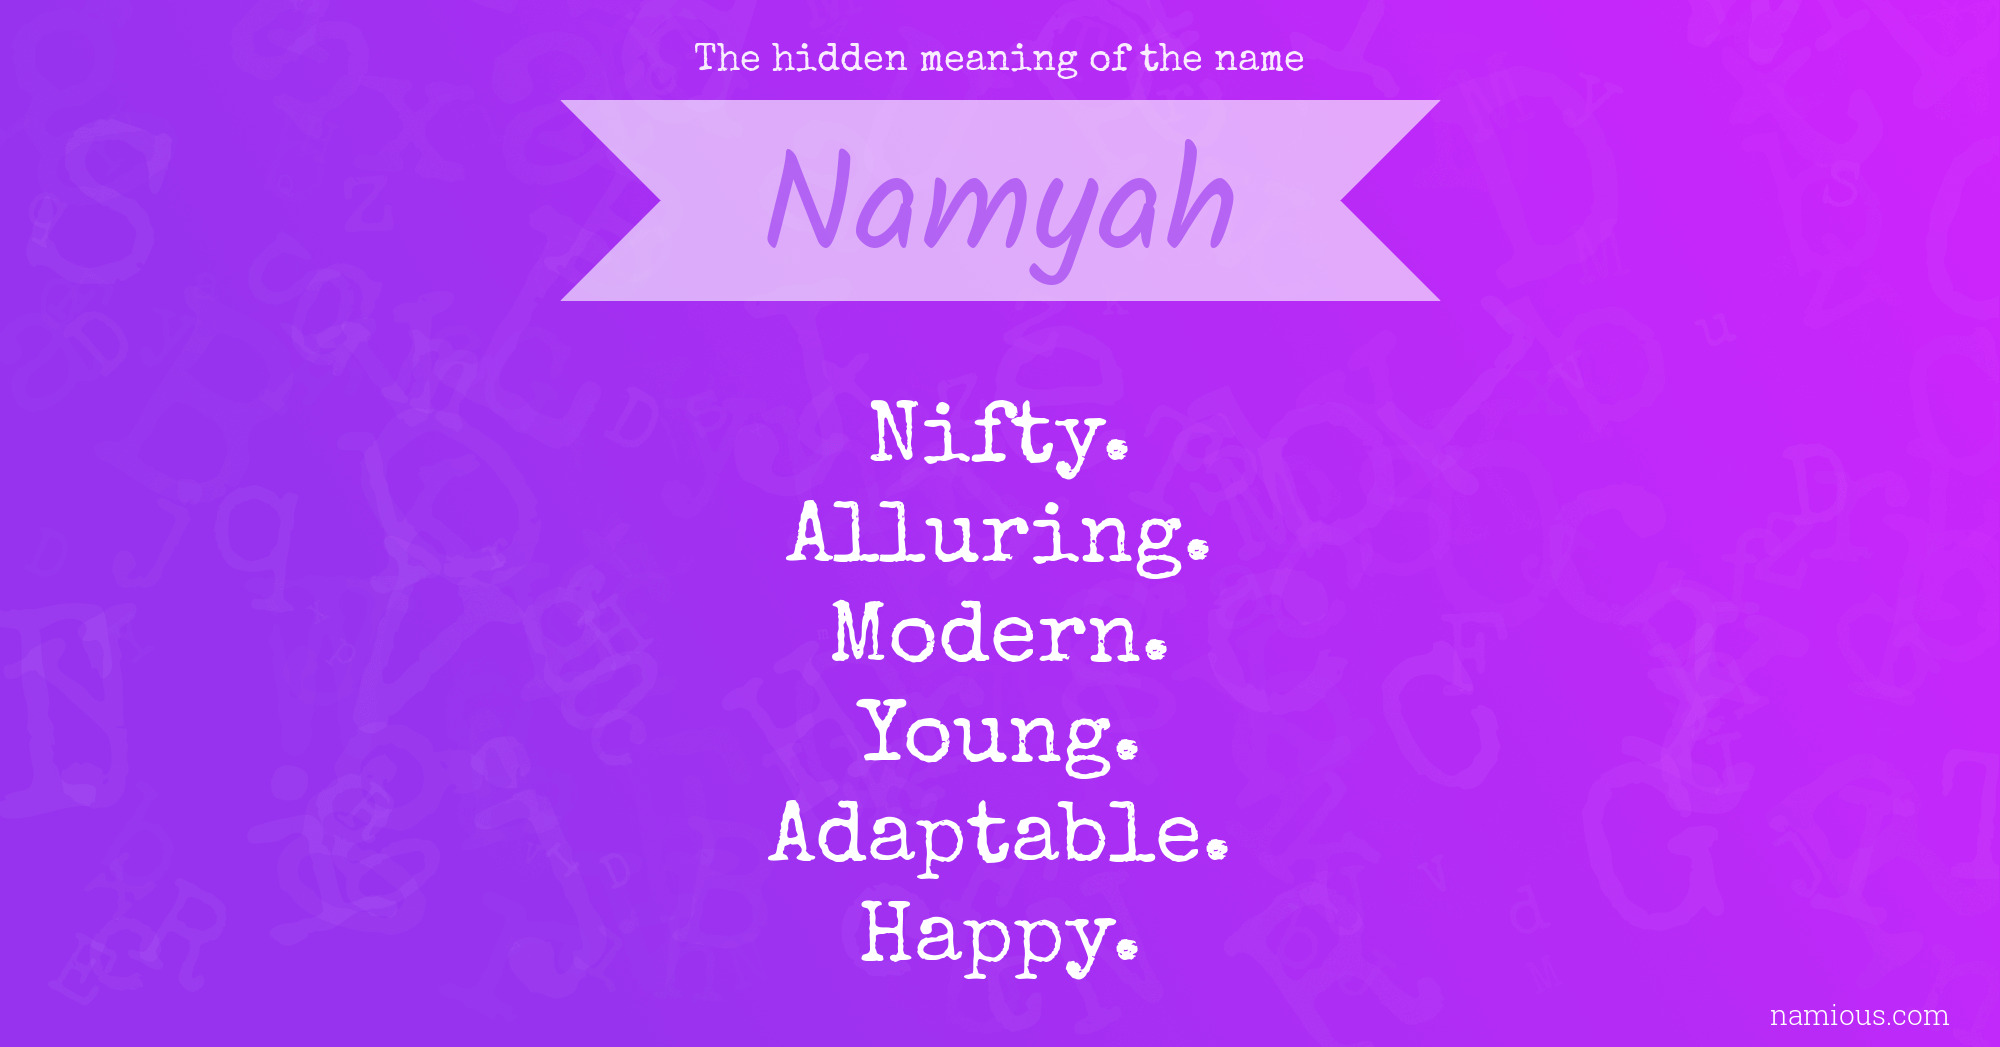 The hidden meaning of the name Namyah